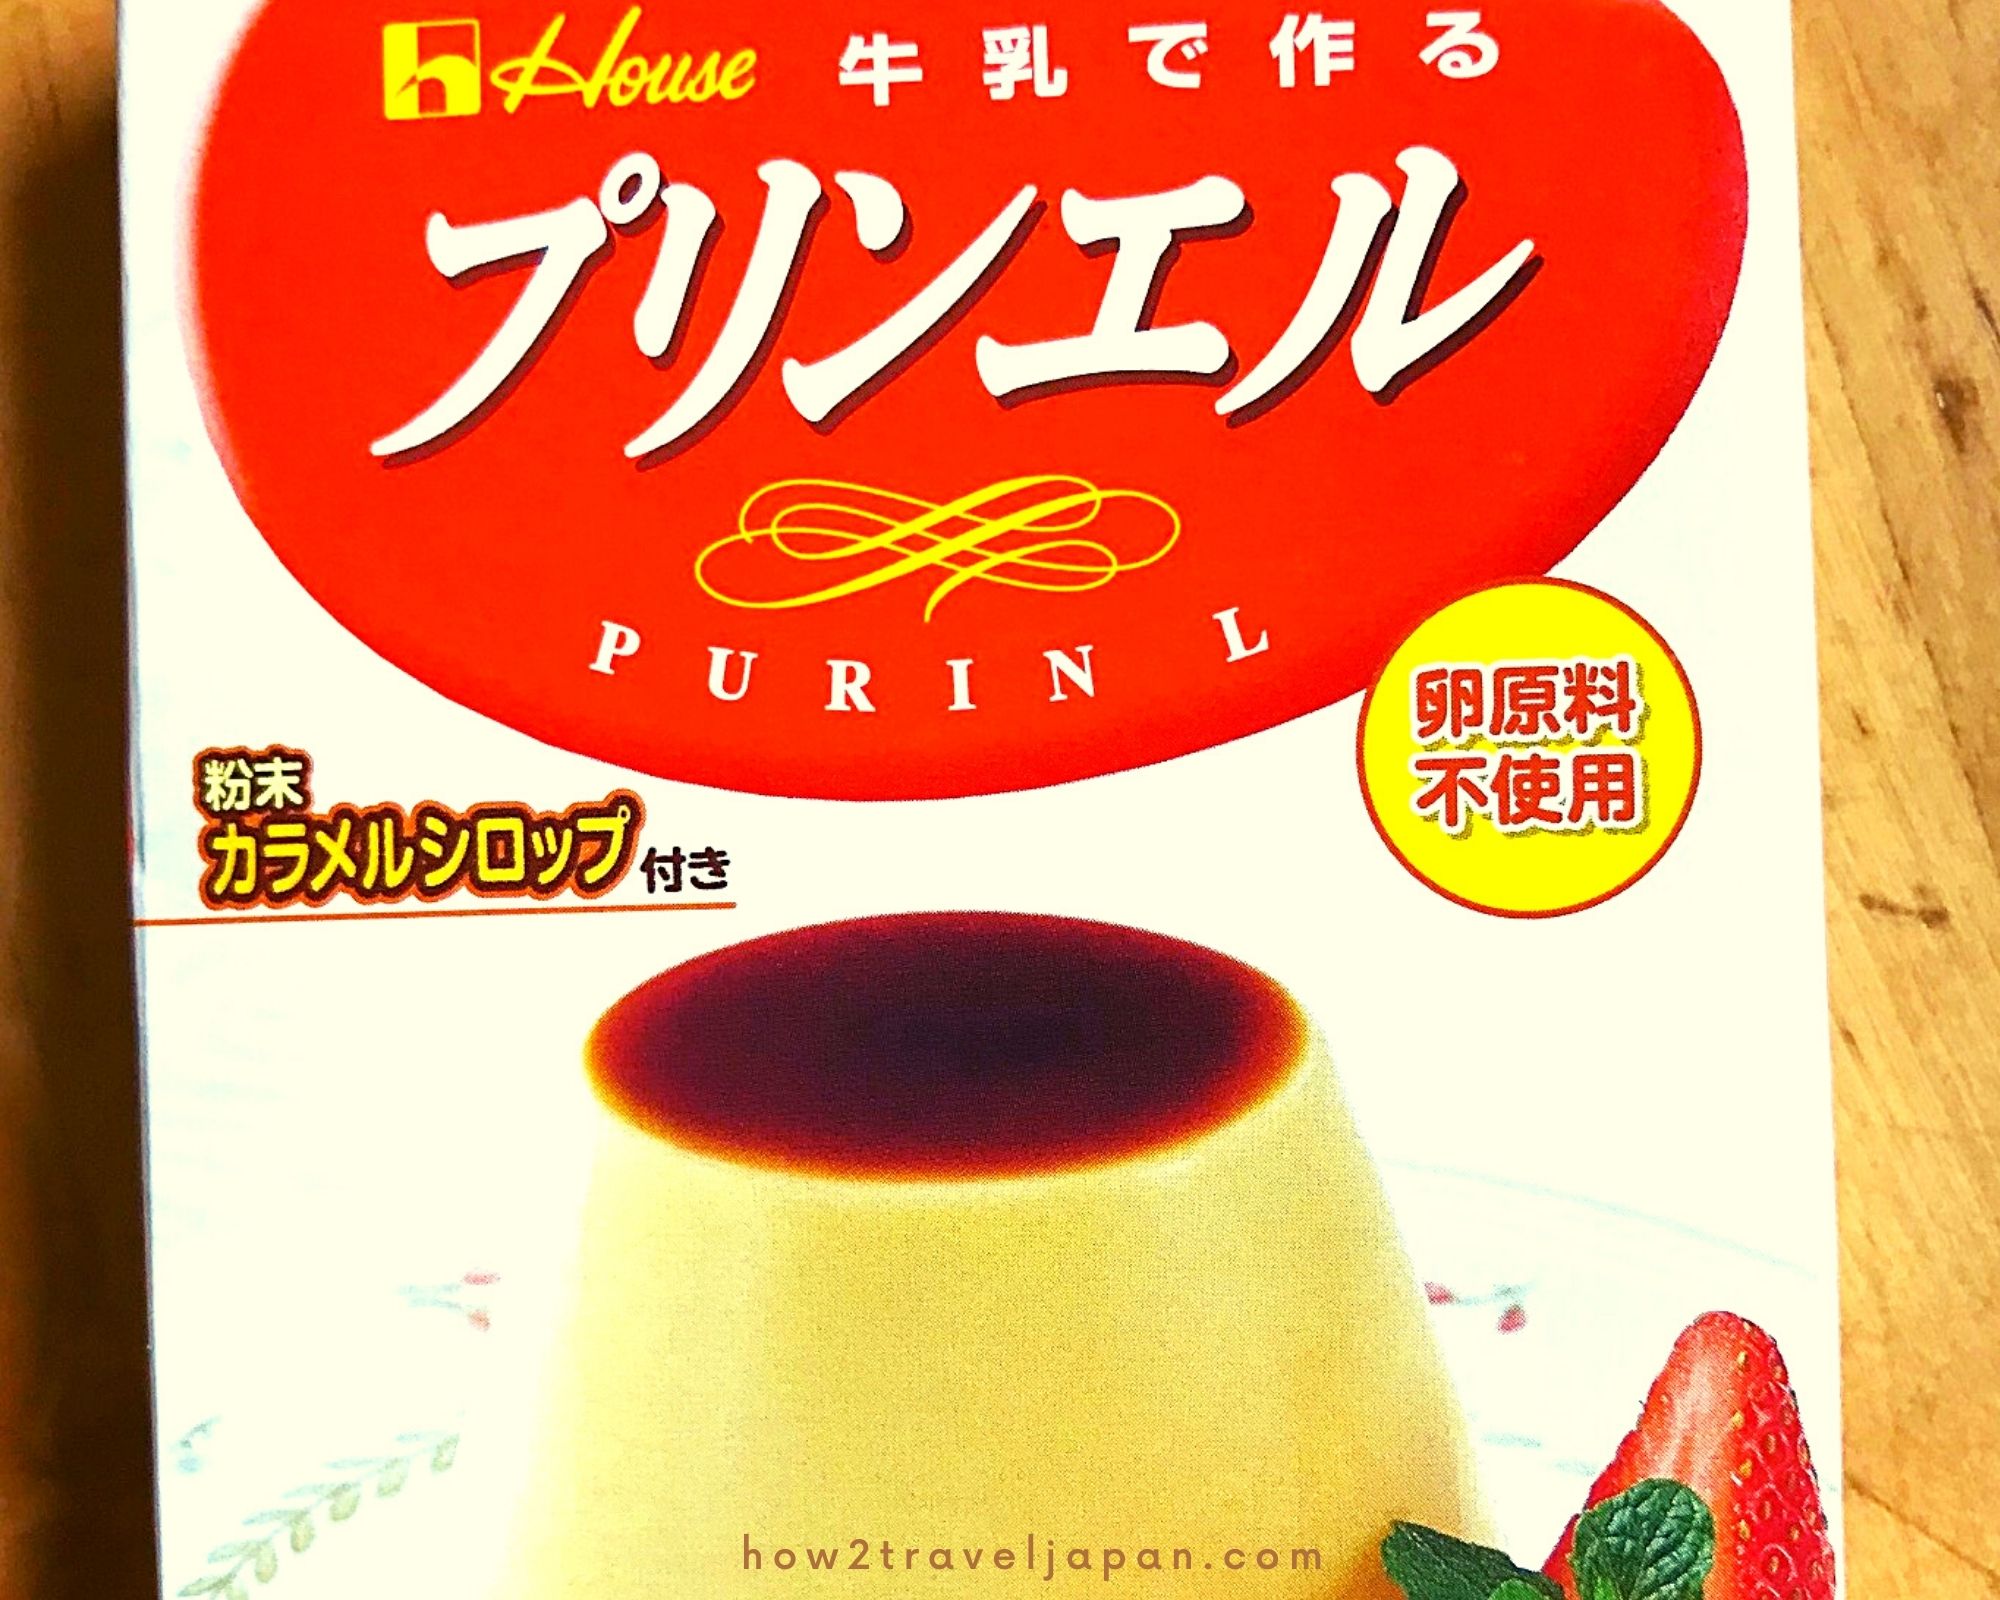 You are currently viewing Purin L from House